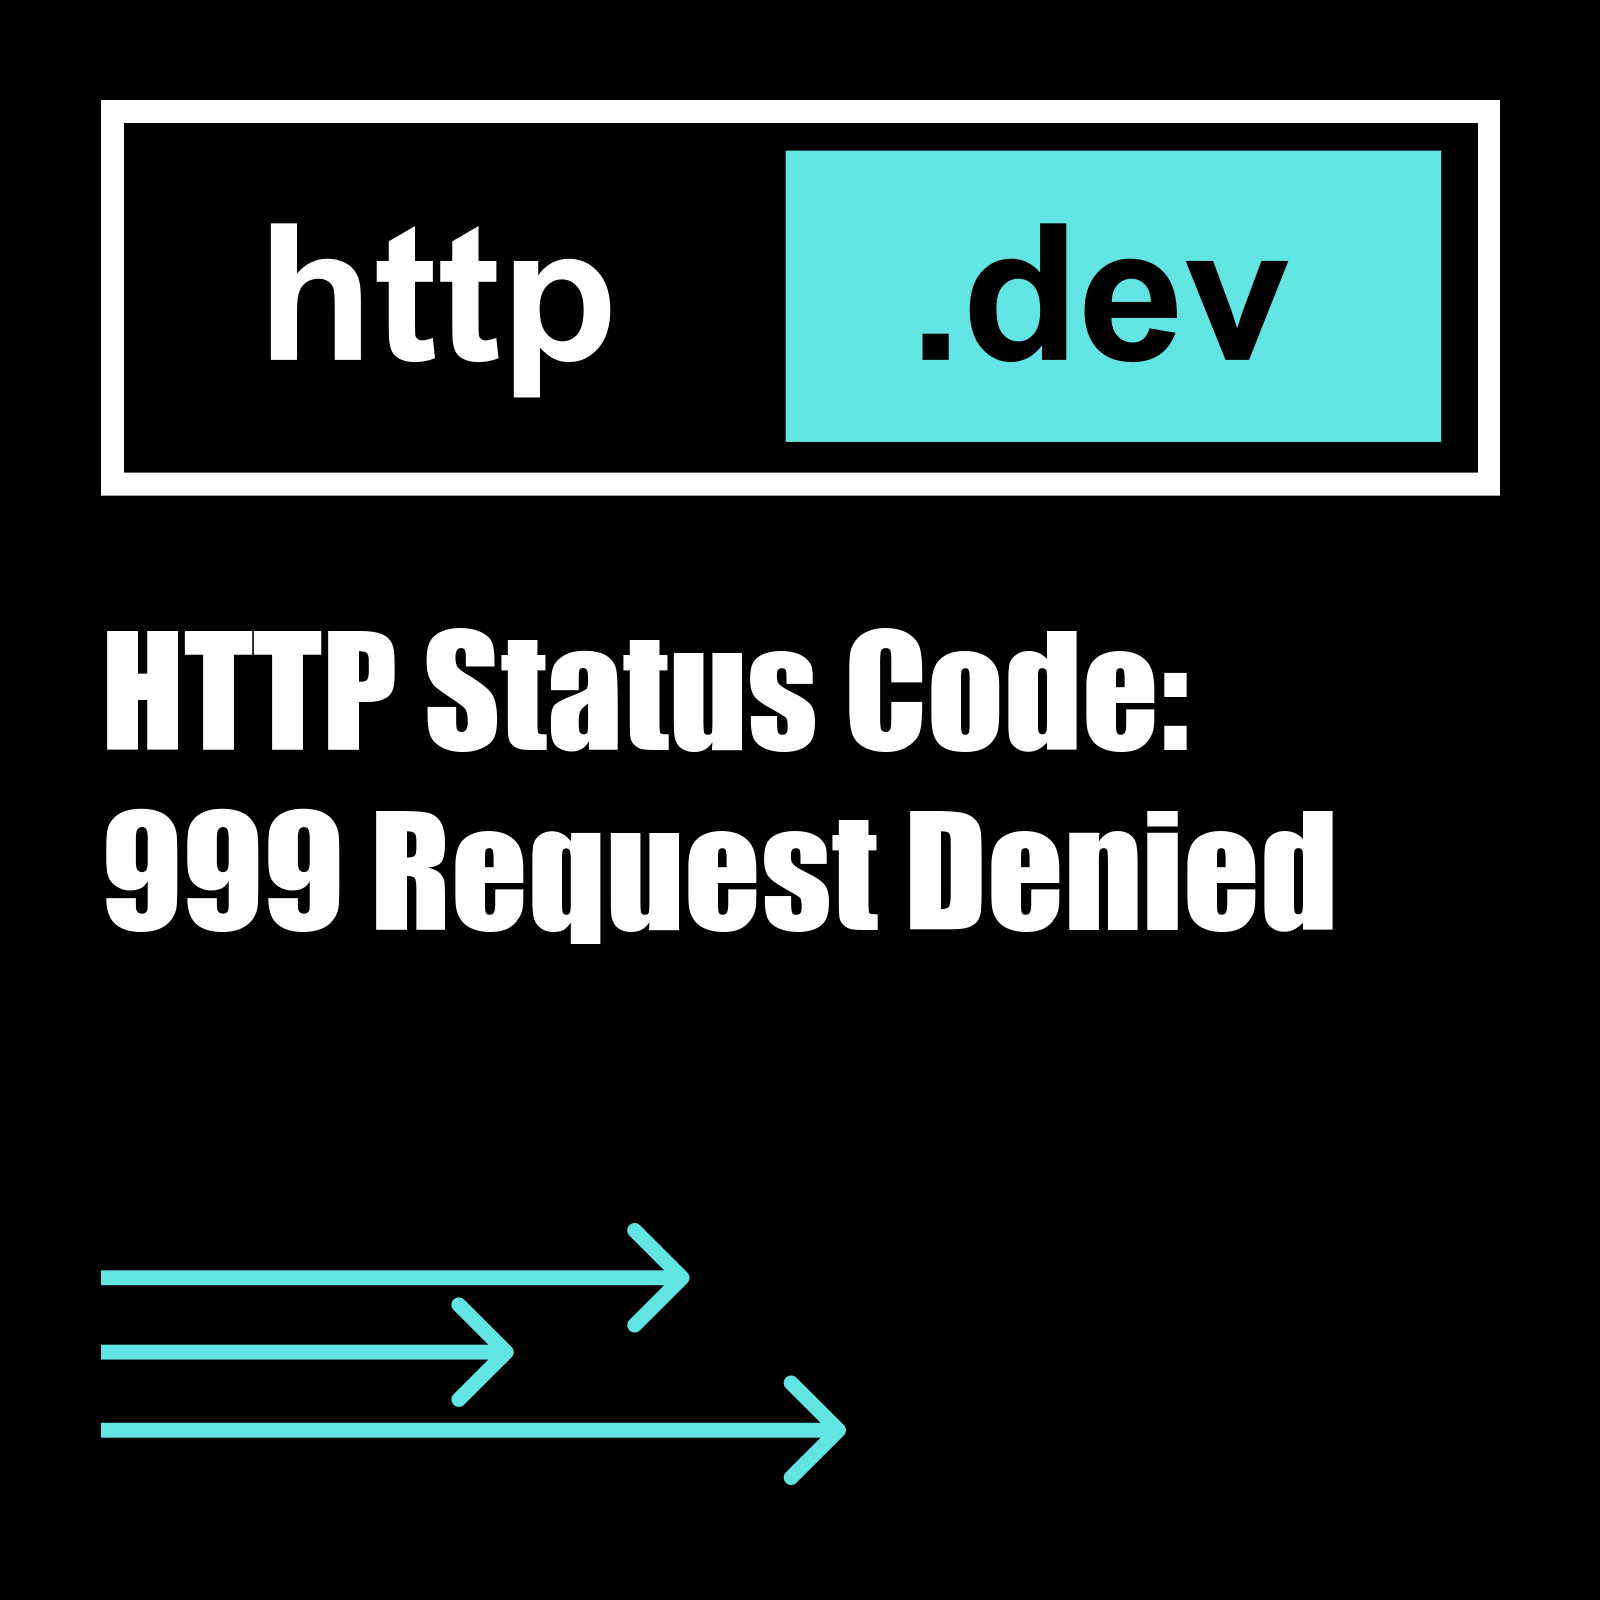 Too many requests error 429 while using python script node with